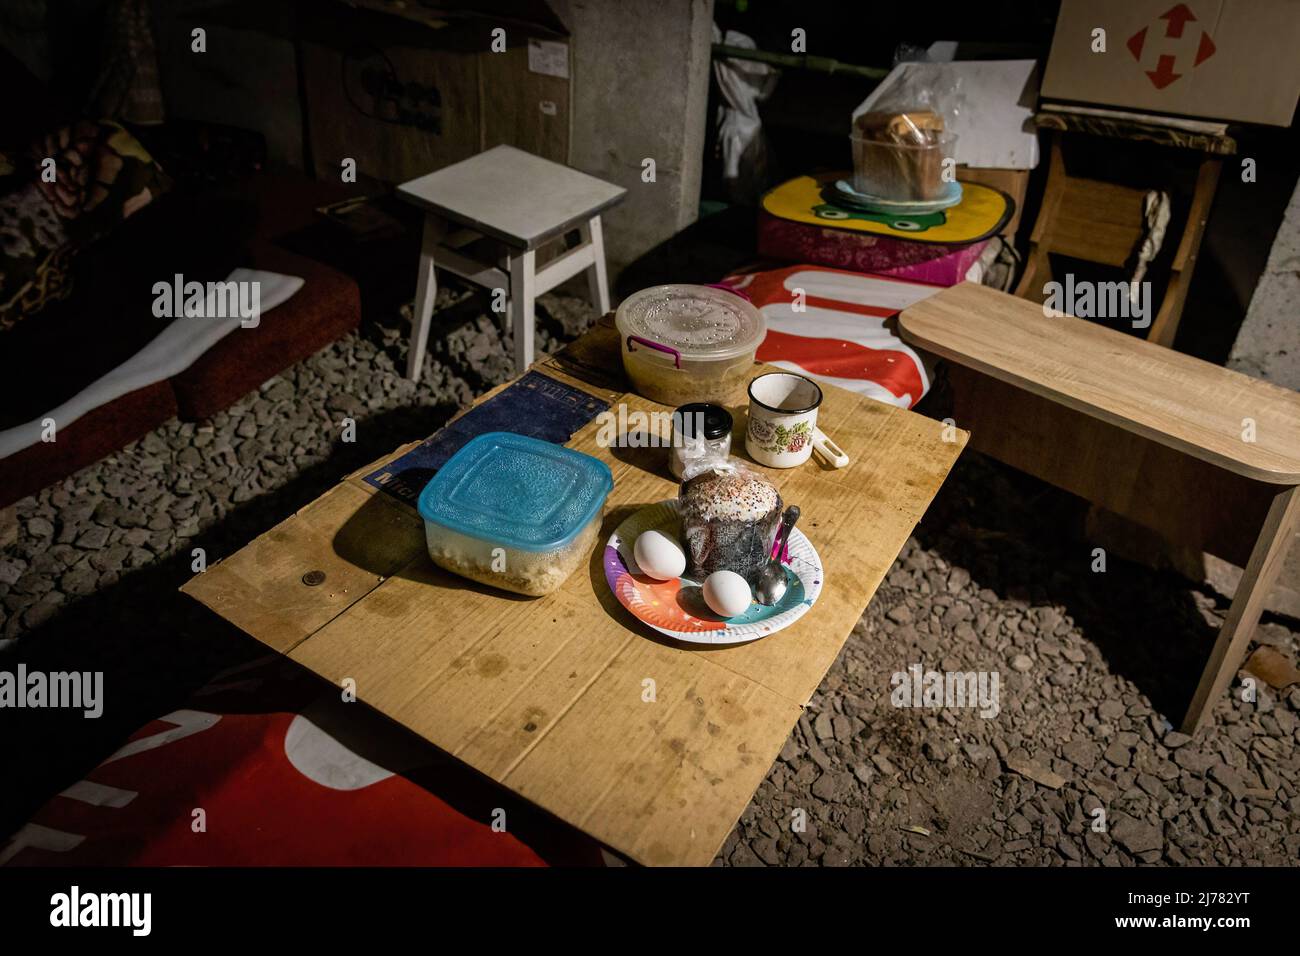 April 28, 2022, Kharkiv, Kharkivs'ka Oblast'', Ukraine: An Easter cupcake and food are seen on a table in a underground bunker in southeastern Kharkiv. Citizens in Kharkiv have been forced to adopt a new life underground in bunkers without electricity and water, as the second biggest city in Ukraine now faces under constant threat of Russian bombardment and airstrikes. Citizens in Kharkiv have been forced to adopt a new life underground in bunkers without electricity and water. The second biggest city in Ukraine now faces the constant threat of Russian bombardment and airstrikes. (Credit Ima Stock Photo